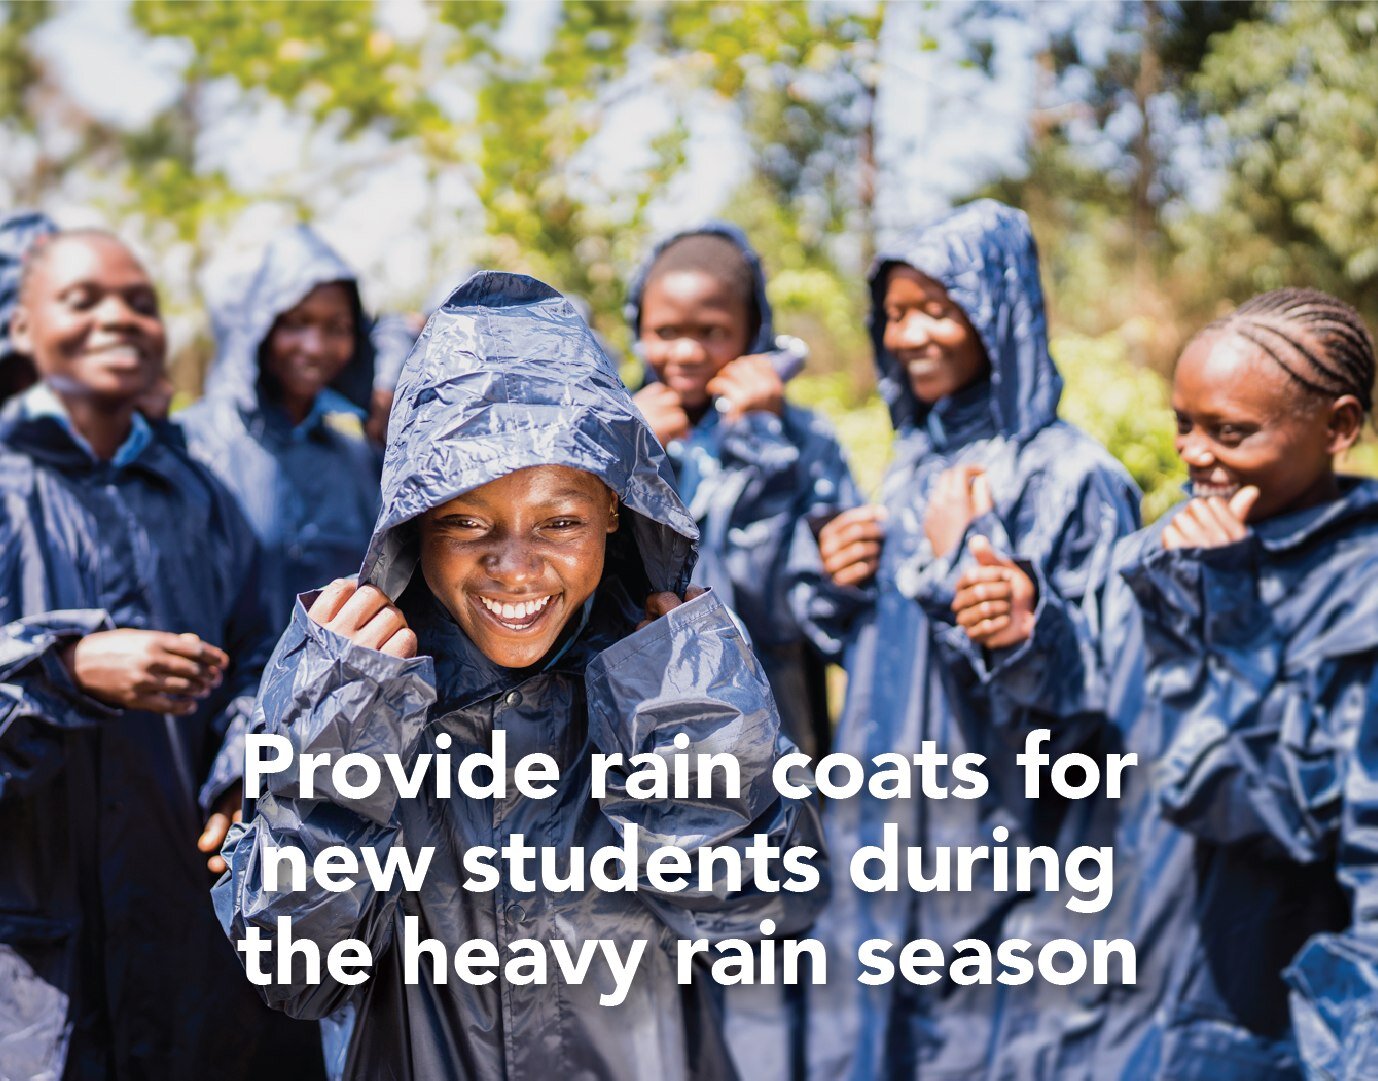 We have only $50 left to raise to provide the young women at Neema with rain coats! Can you help?

With the rainy season in full swing in our area of rural Kenya, we would love for our students to have their own rain coats as they navigate between th